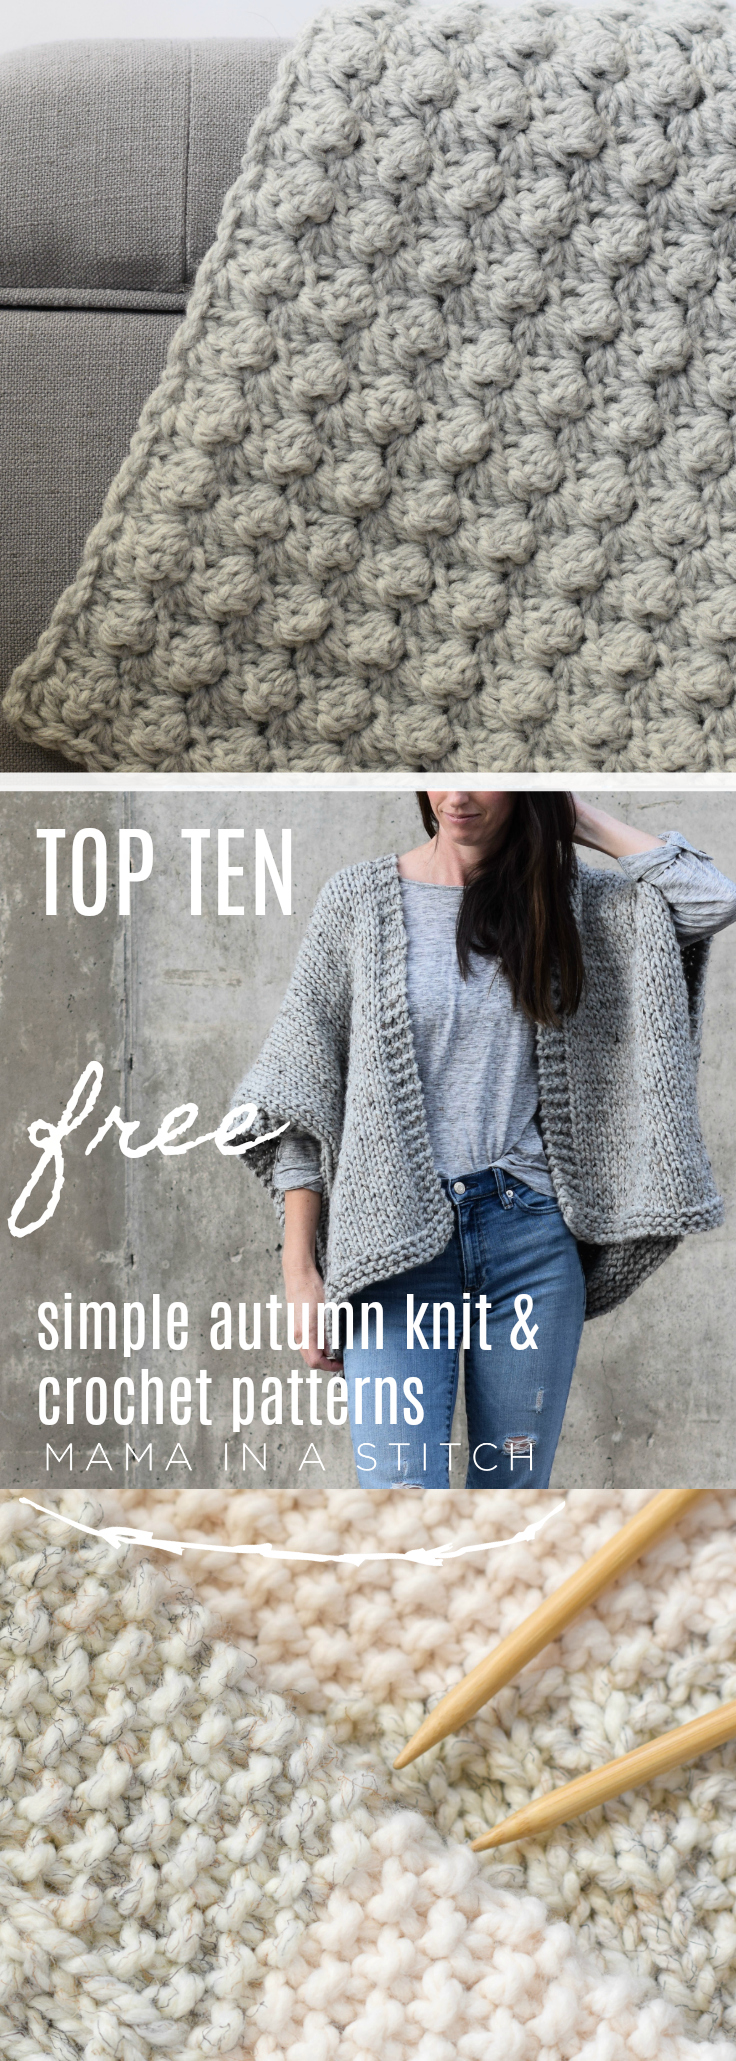 Mama In A Stitch Top Fall Knitting and Crochet Patterns